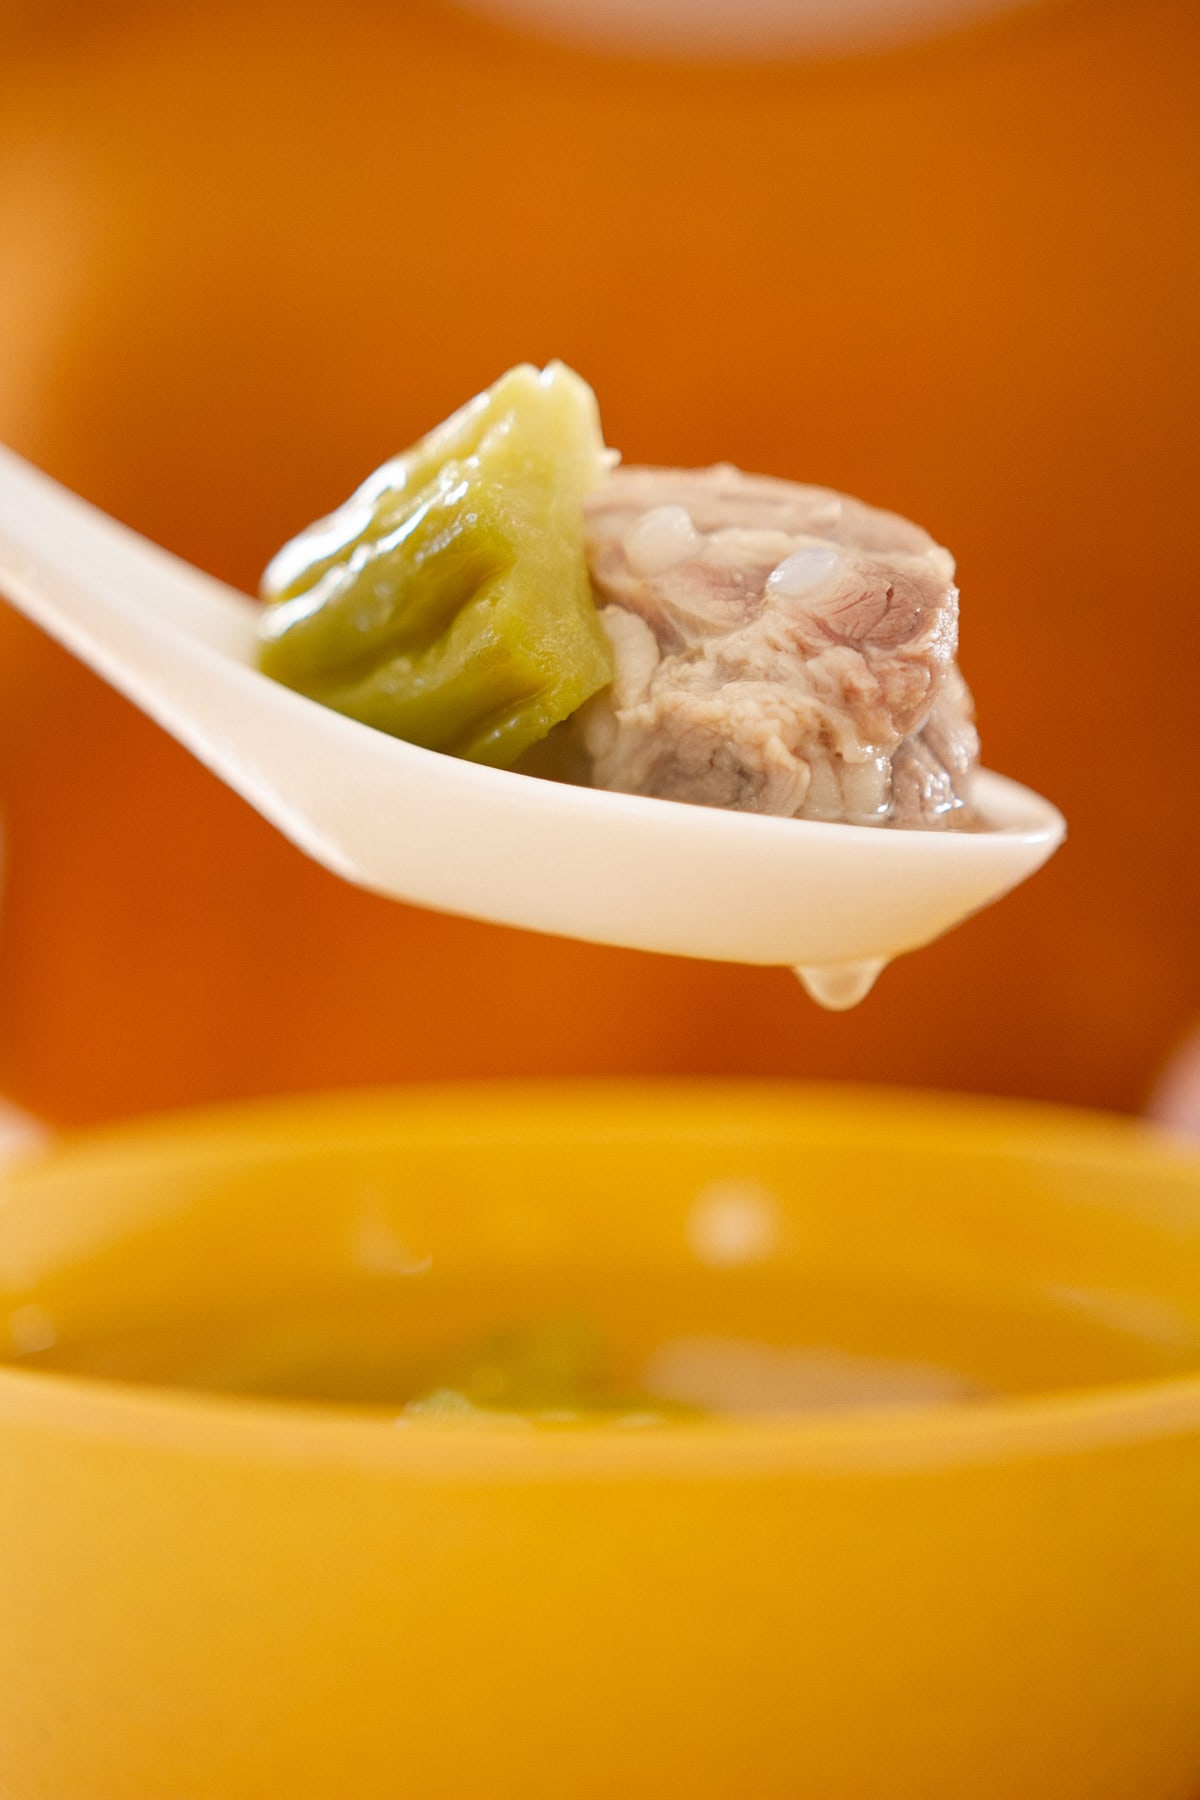 Close up of a spoon filled with a pork rib and a piece of bitter melon, dripping soup into a bowl.